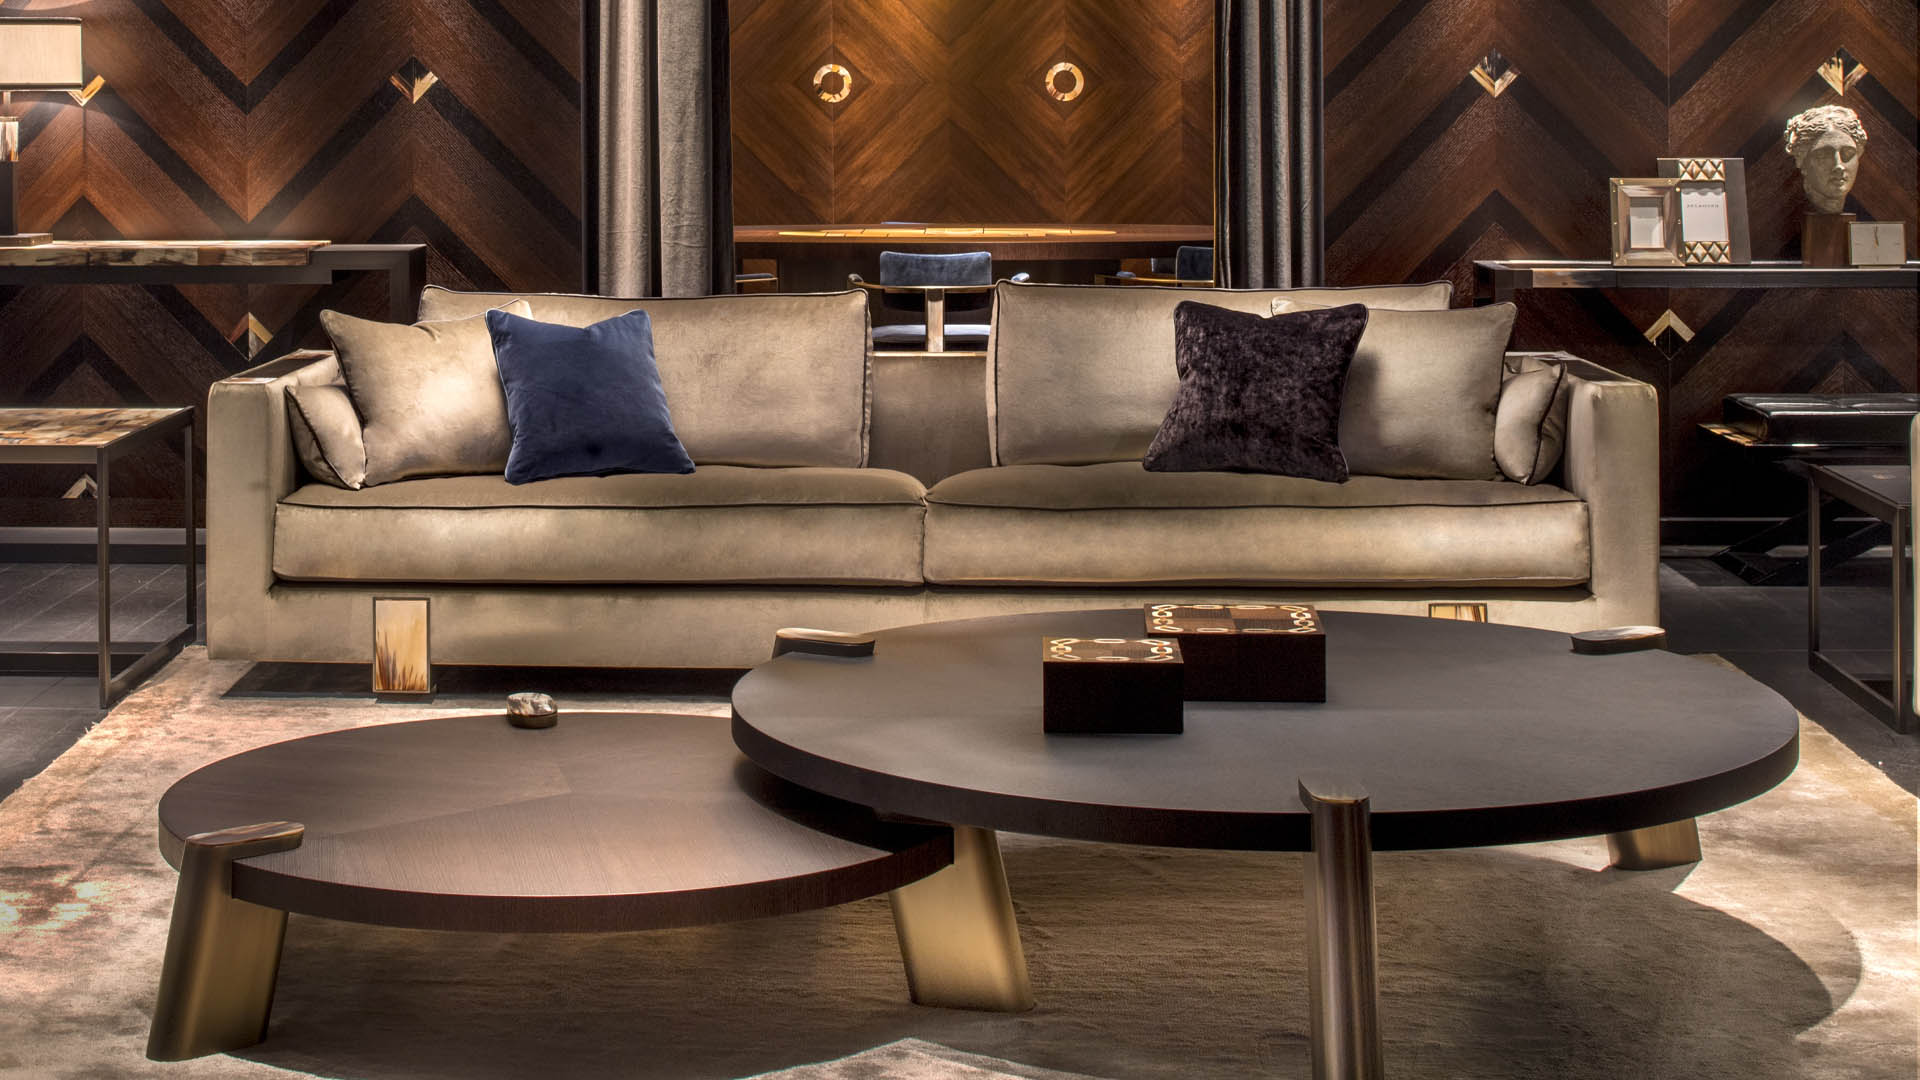 Sofas and seats - Adriano sofa in Lario velvet with horn details - 16-9 - Arcahorn